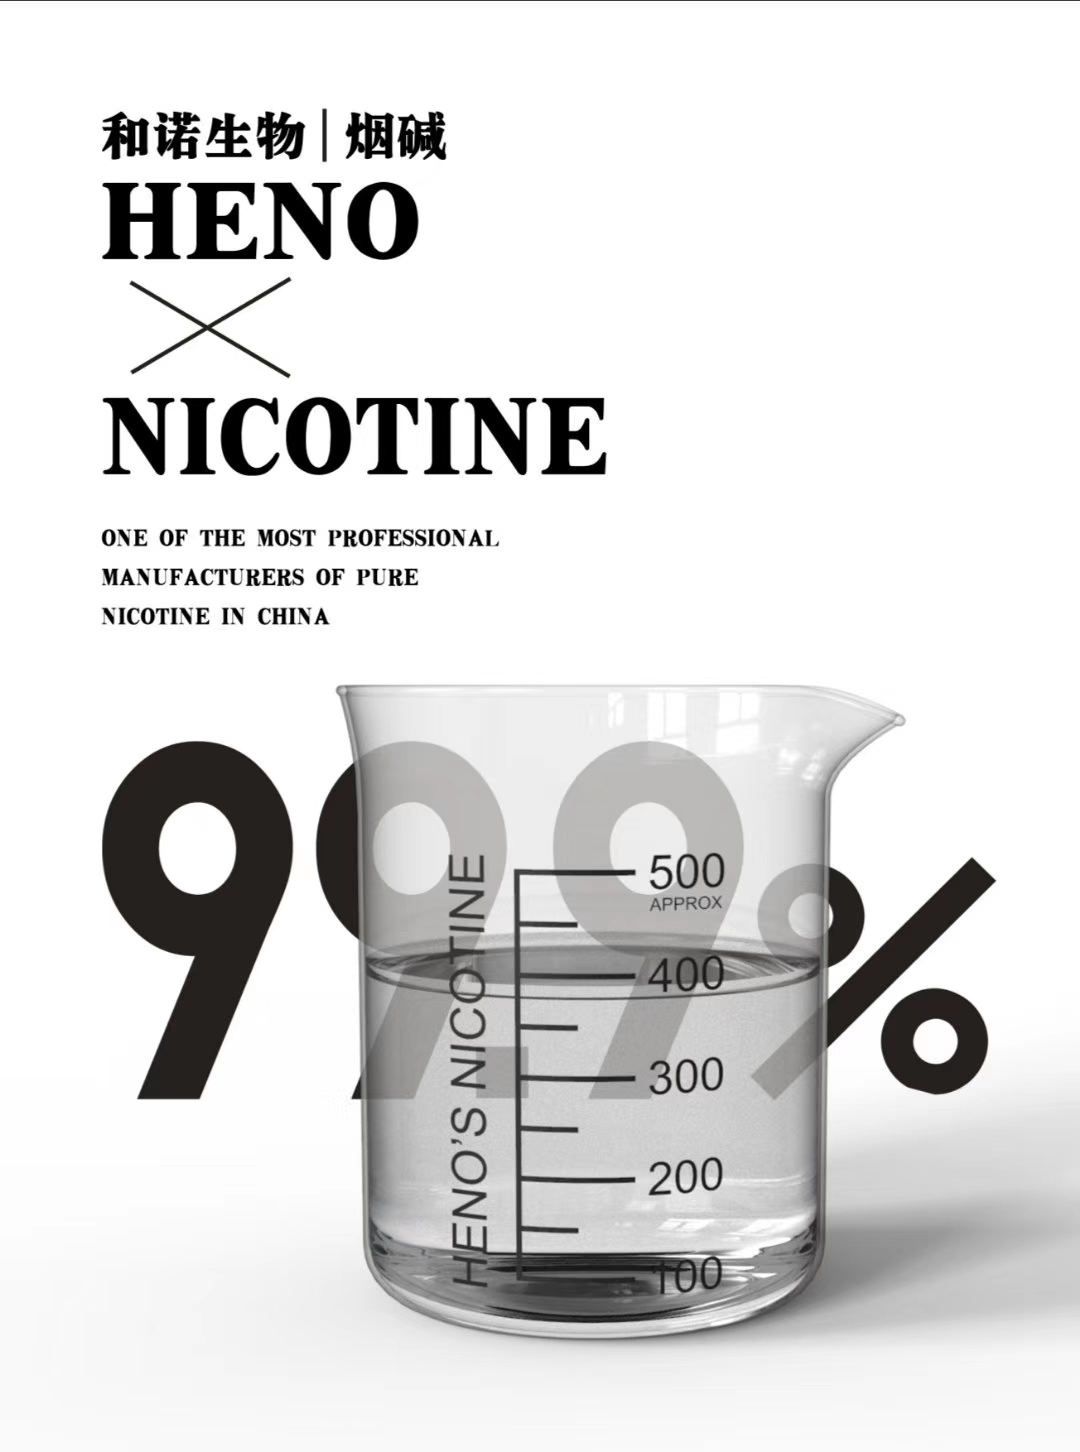 The effect of nicotine on the body